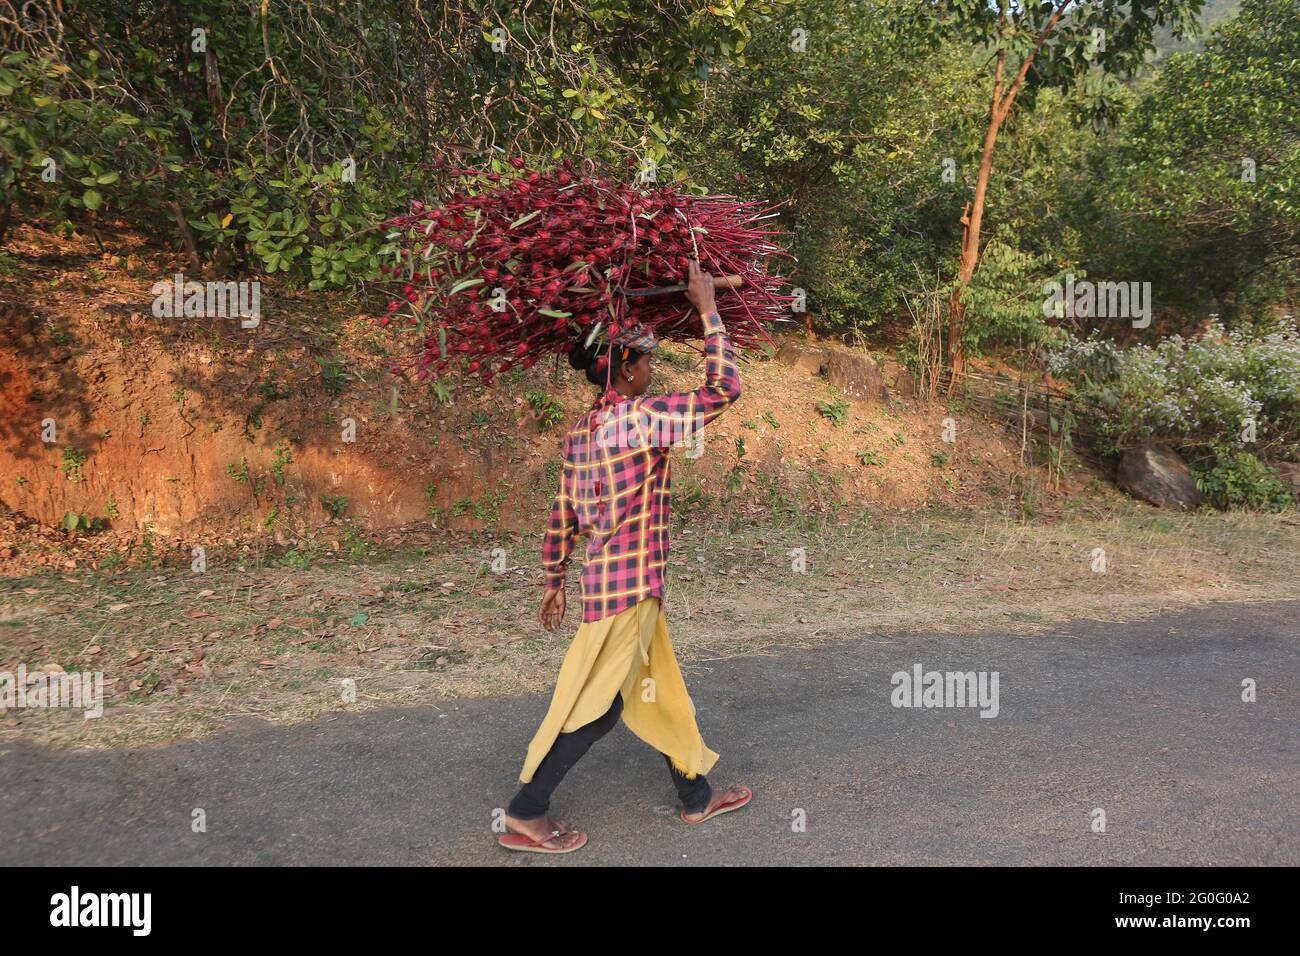 LANJIA SAORA TRIBE. Woman carrying a bundle of red roselle or ambadi collected from the forest. Hibiscus sabdariffa. Odisha, India Stock Photo